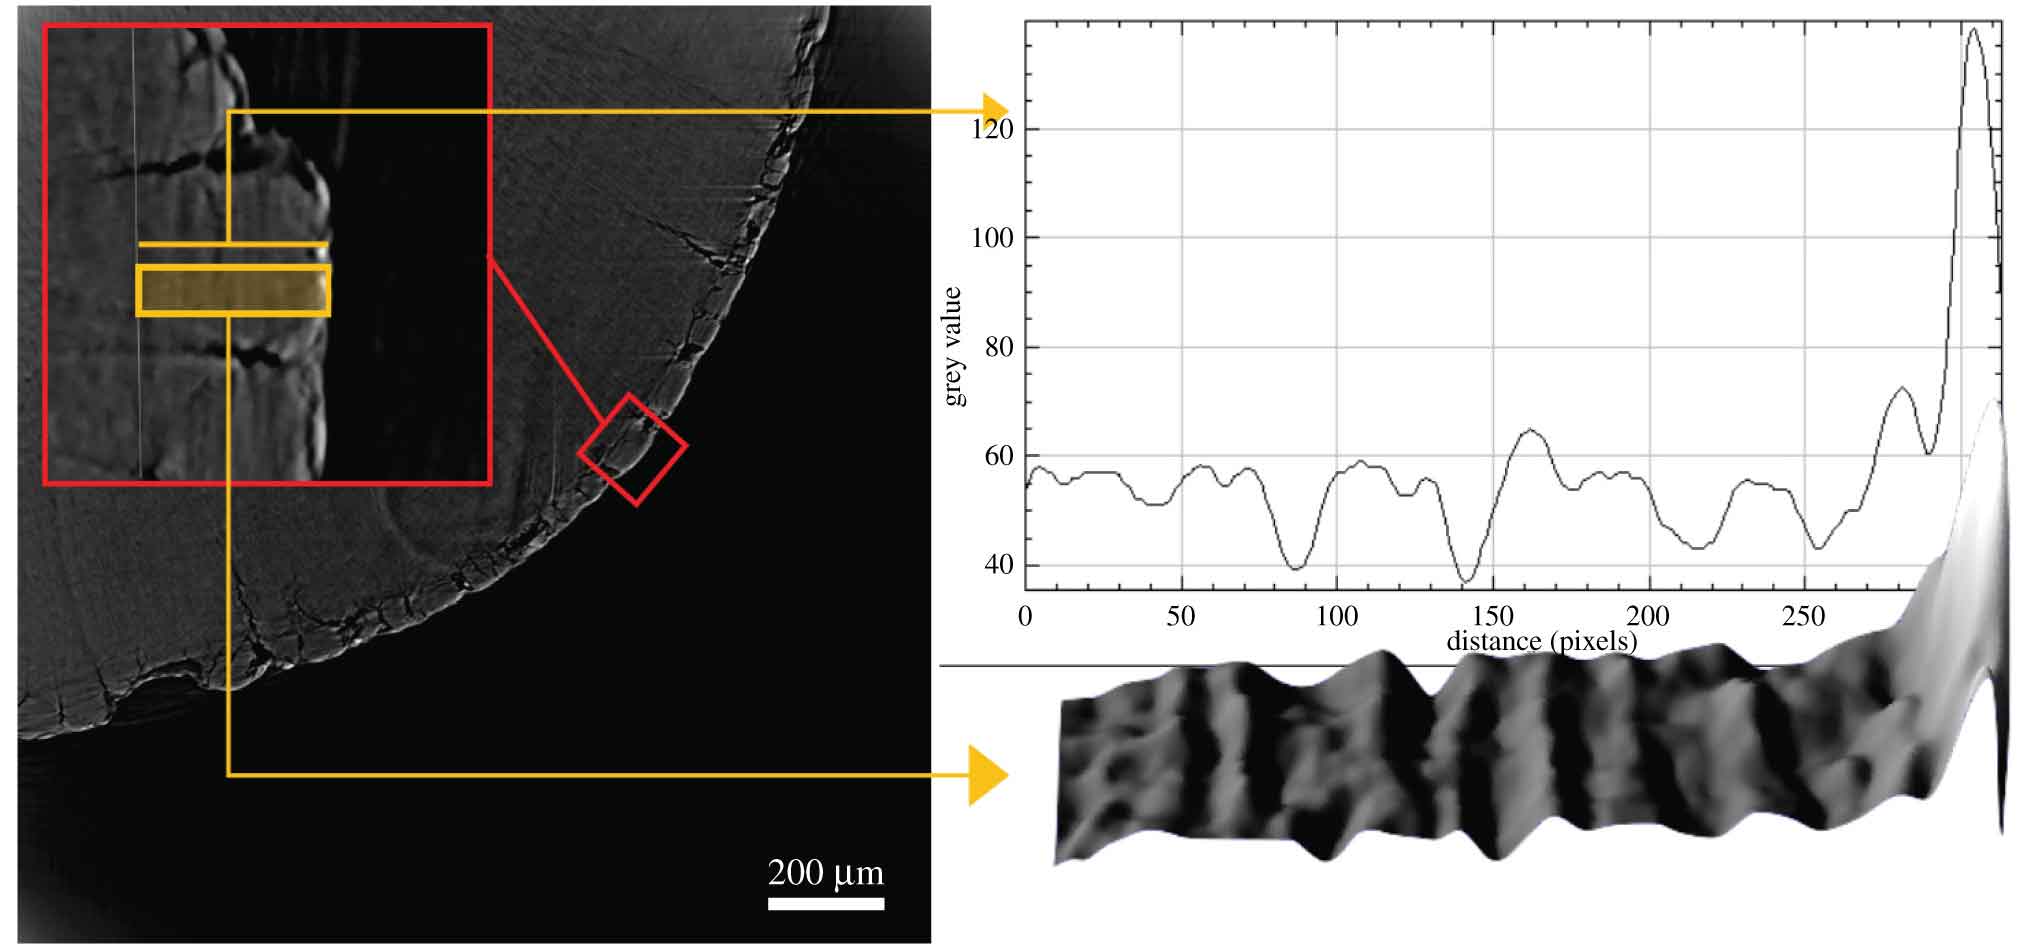 A micrograph showing the tooth root section with cementum in expanded pane, on the right a readout of relative density with peaks and troughs.